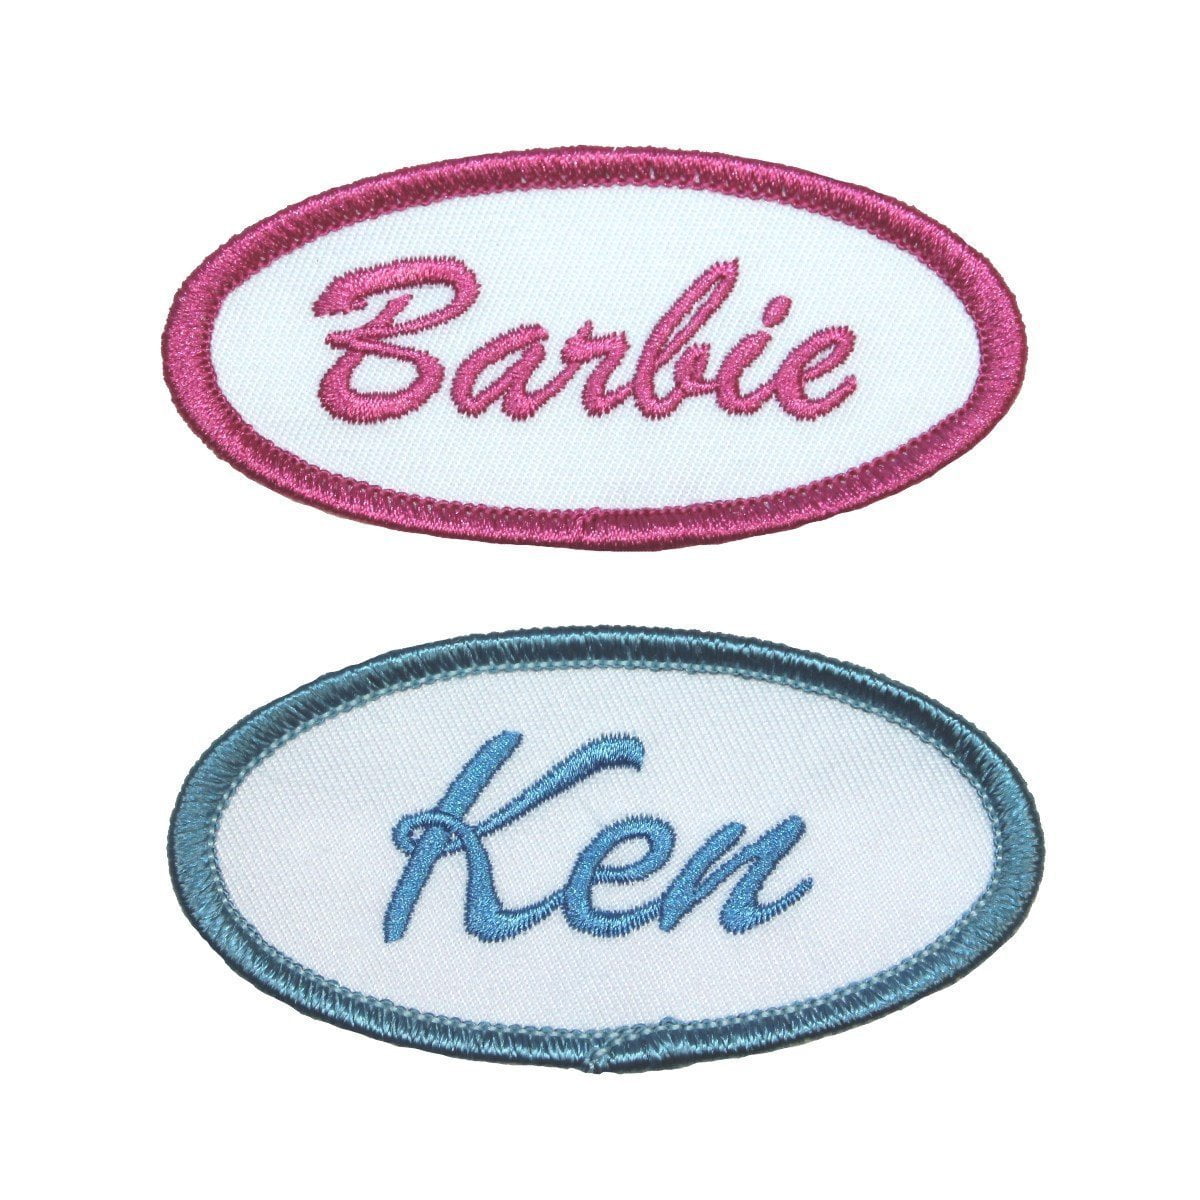 Set of 2 Barbie and Ken Name Tags 3 x 1.5 Embroidered Iron On Uniform  Applique Patch 